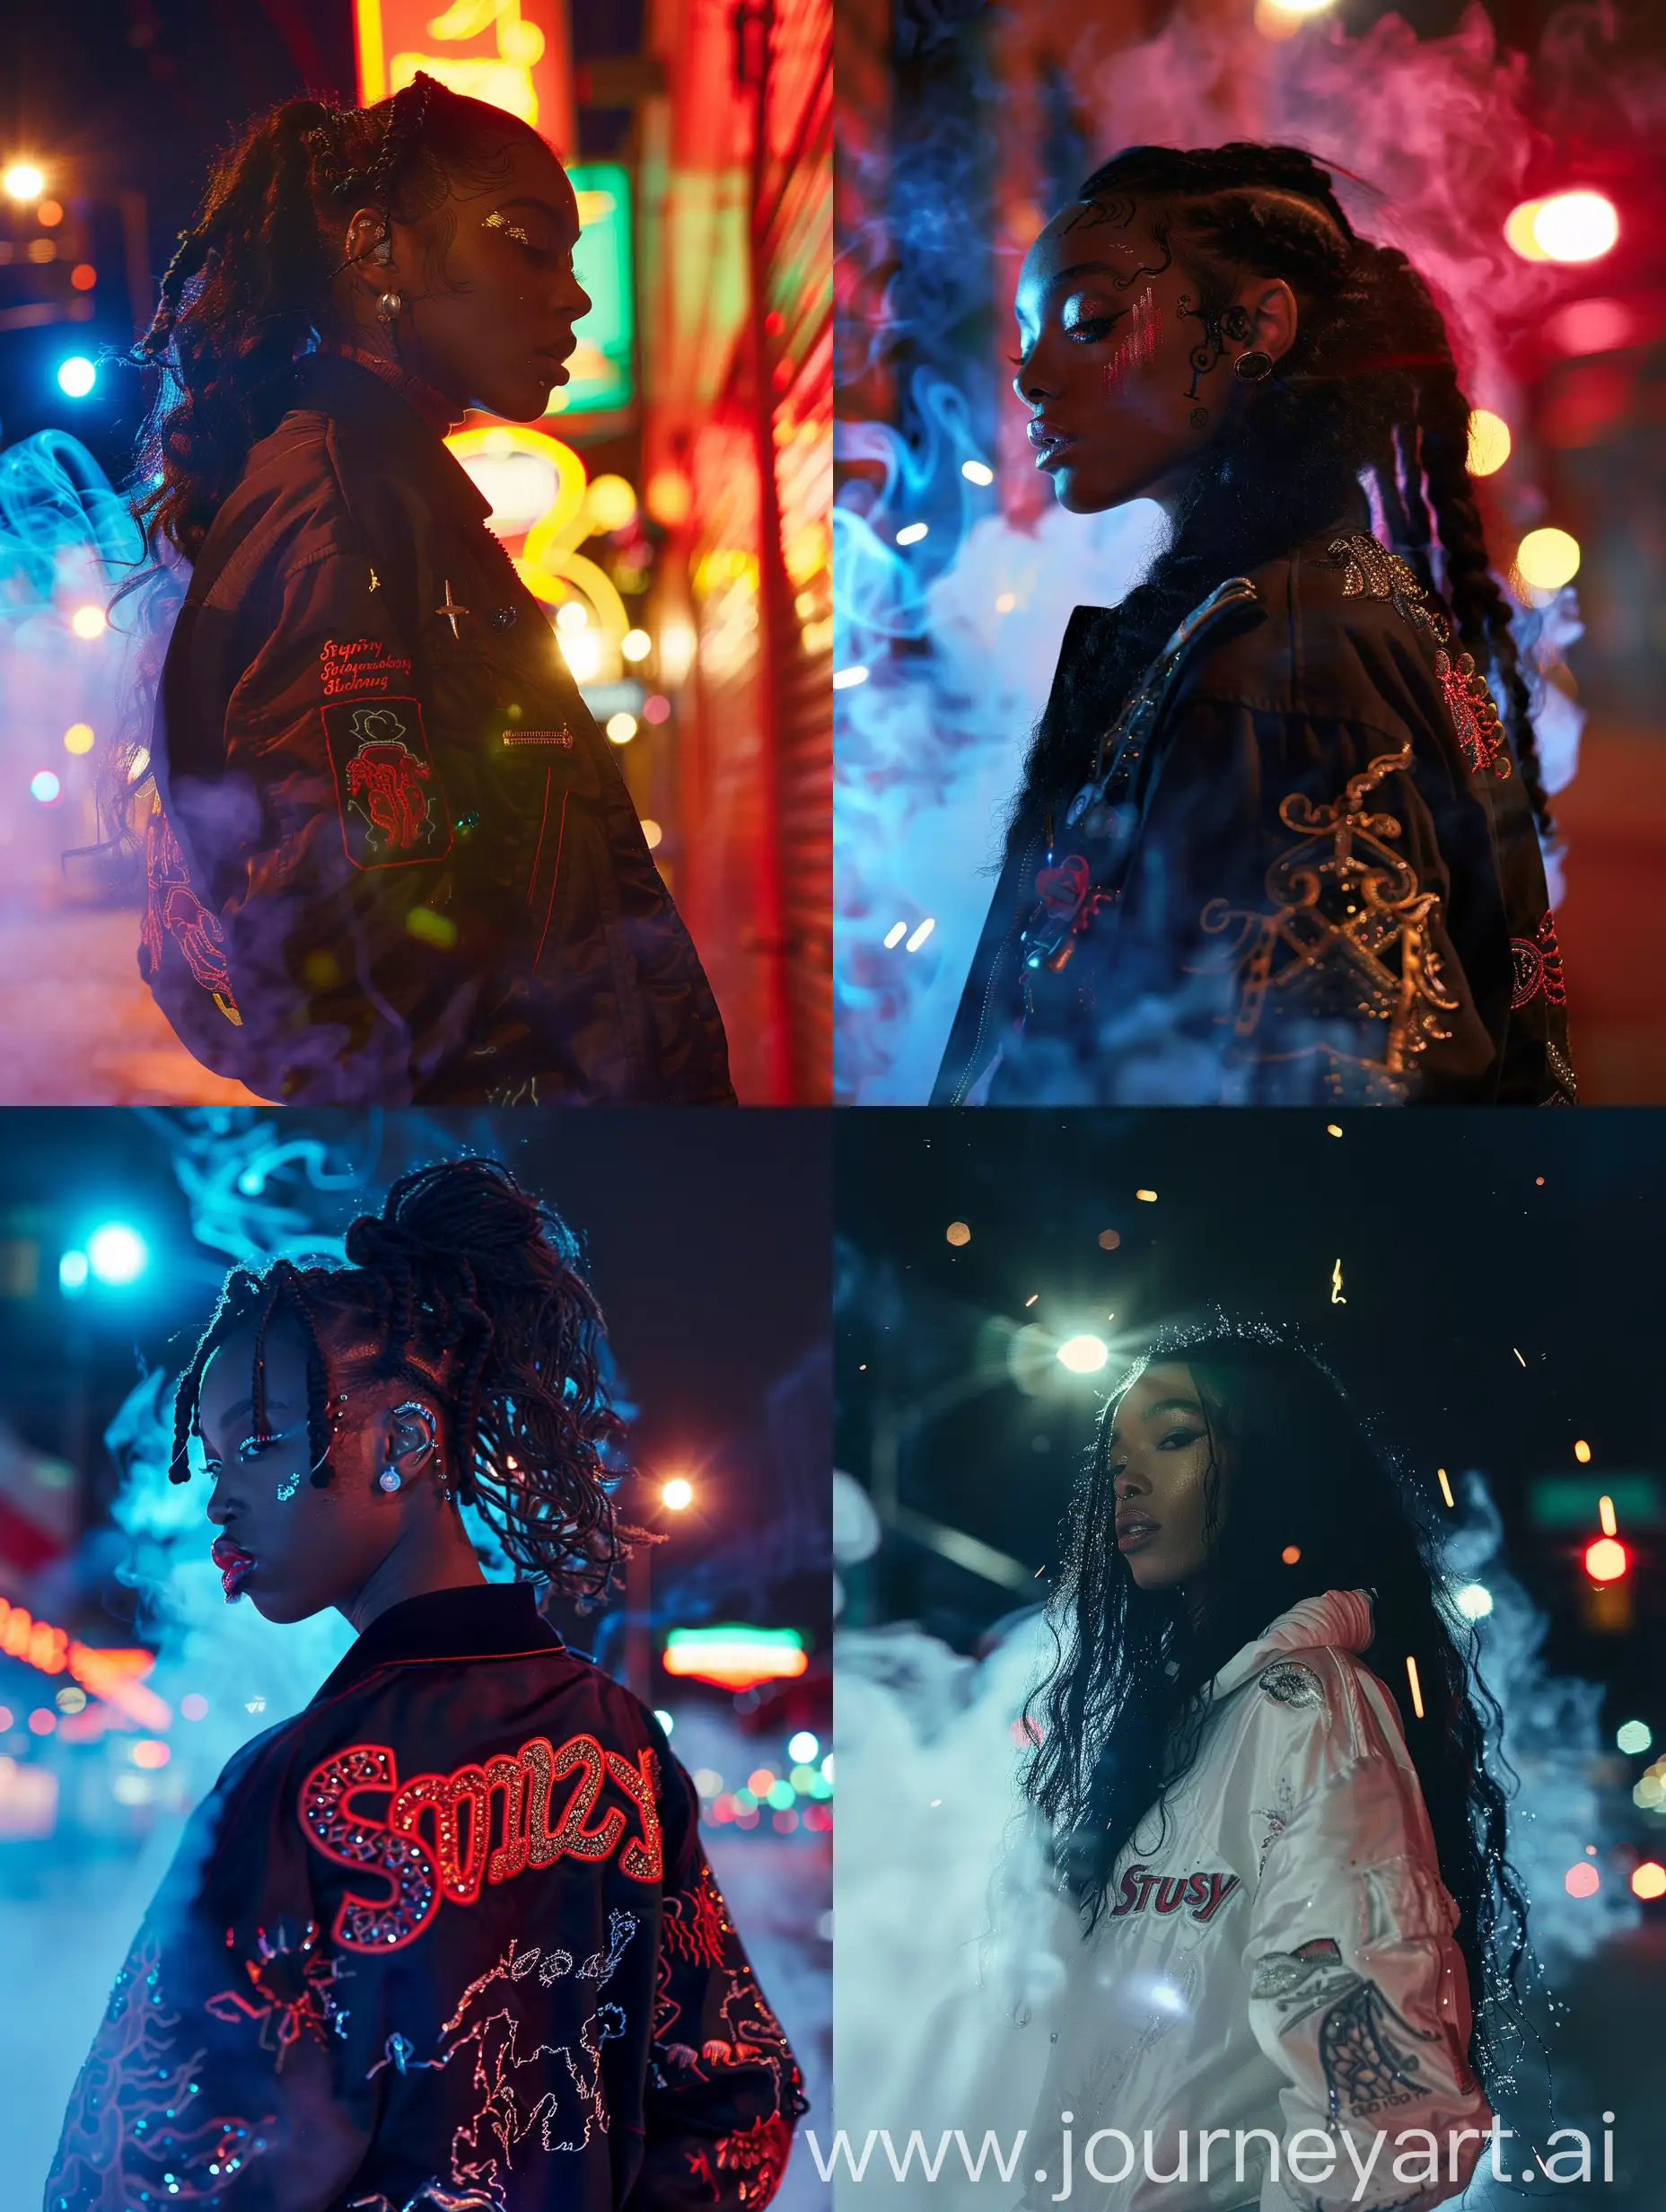 Downtown-Nighttime-Streetwear-Sza-in-Stussy-x-Supreme-Collaboration-with-Pulsating-Lights-and-HyperRealistic-Embroidery